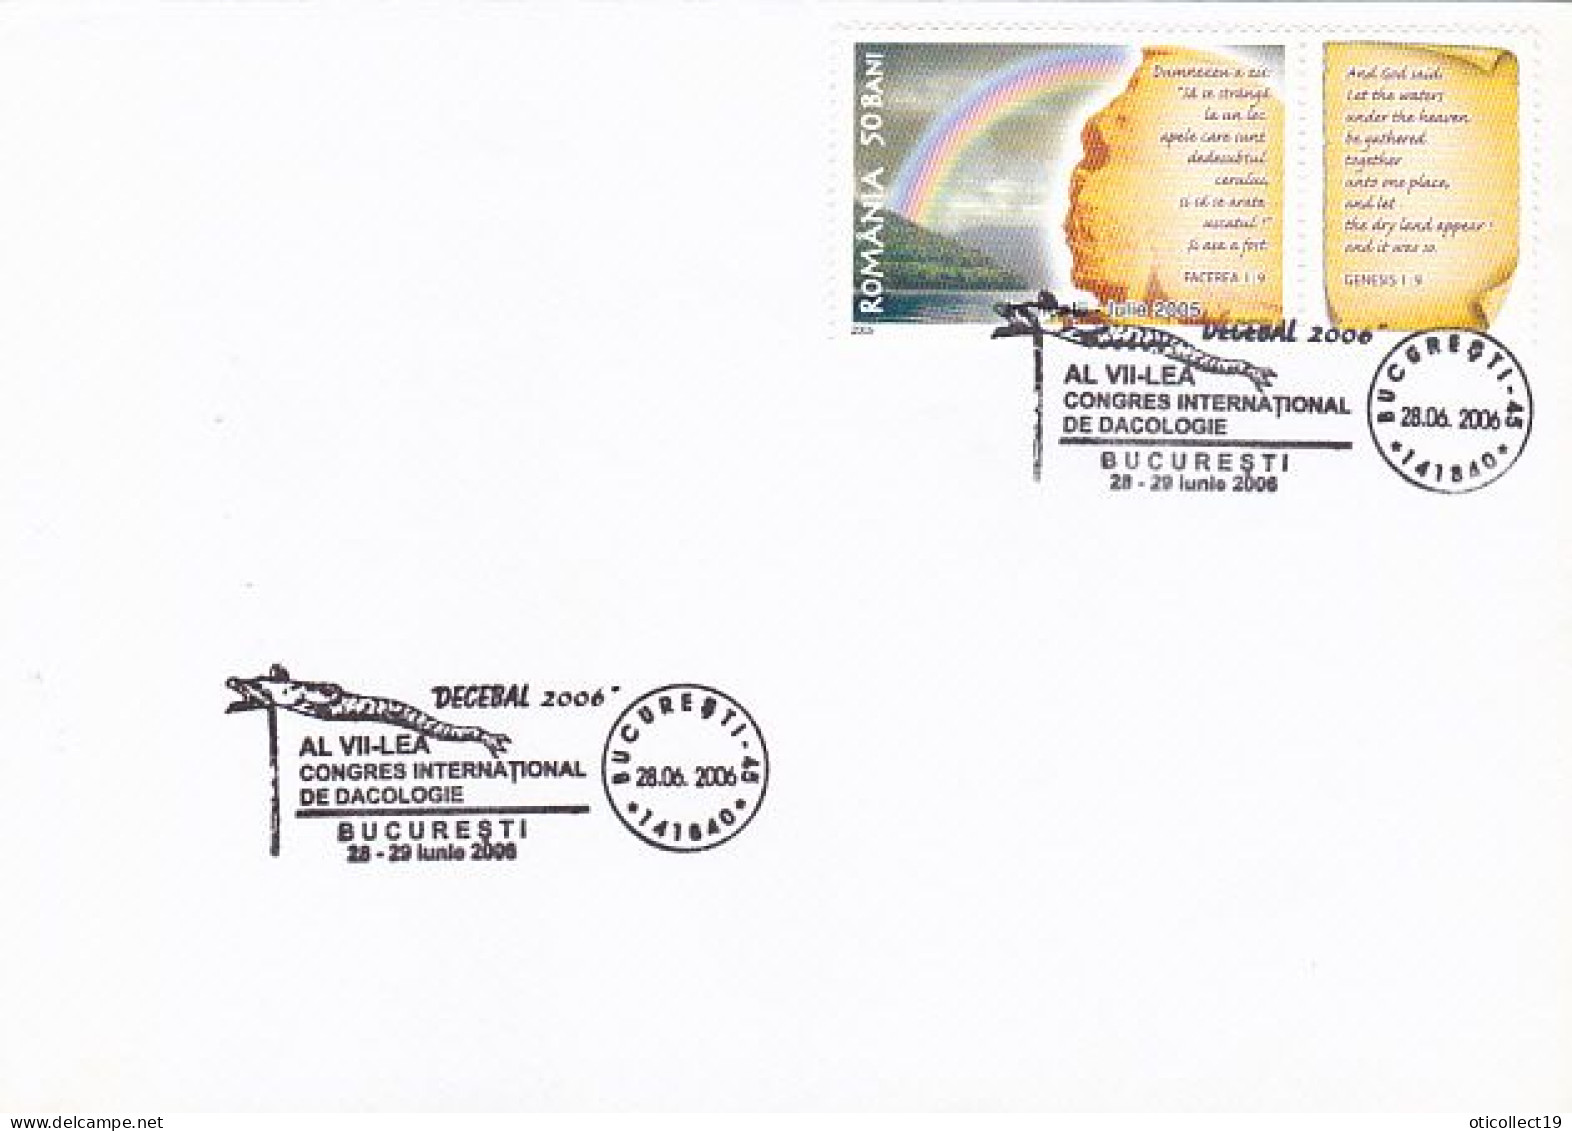 DACOLOGY INTERNATIONAL CONGRESS SPECIAL POSTMARKS, 2005 FLOODS RELIEF STAMP ON COVER, 2006, ROMANIA - Covers & Documents